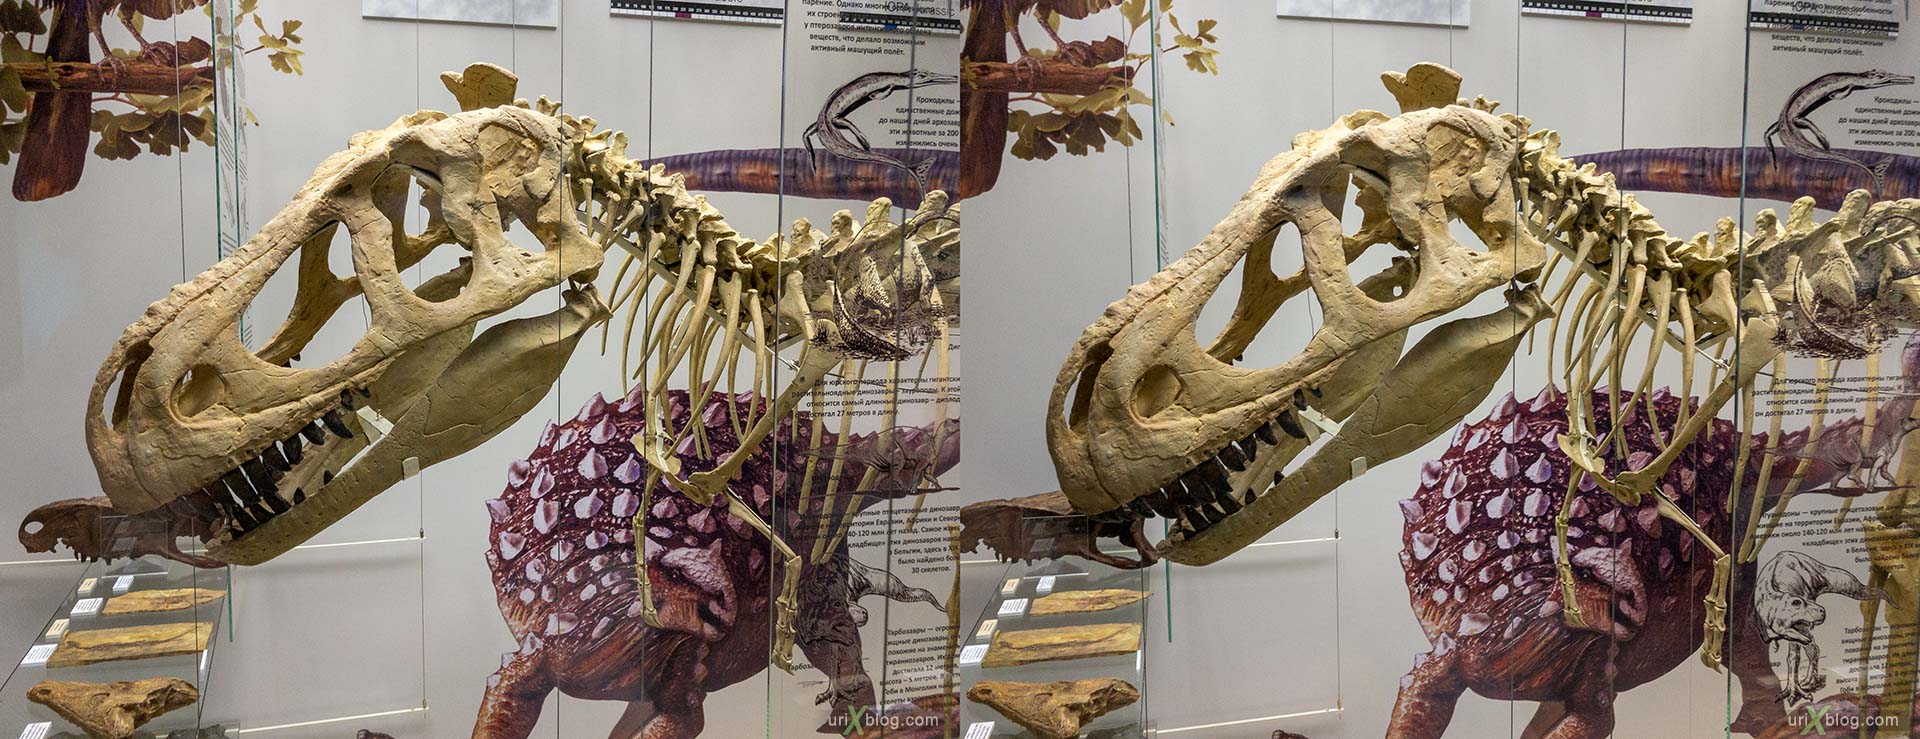 Darwin museum, dinosaur, Moscow, Russia, 3D, stereo pair, cross-eyed, crossview, cross view stereo pair, stereoscopic